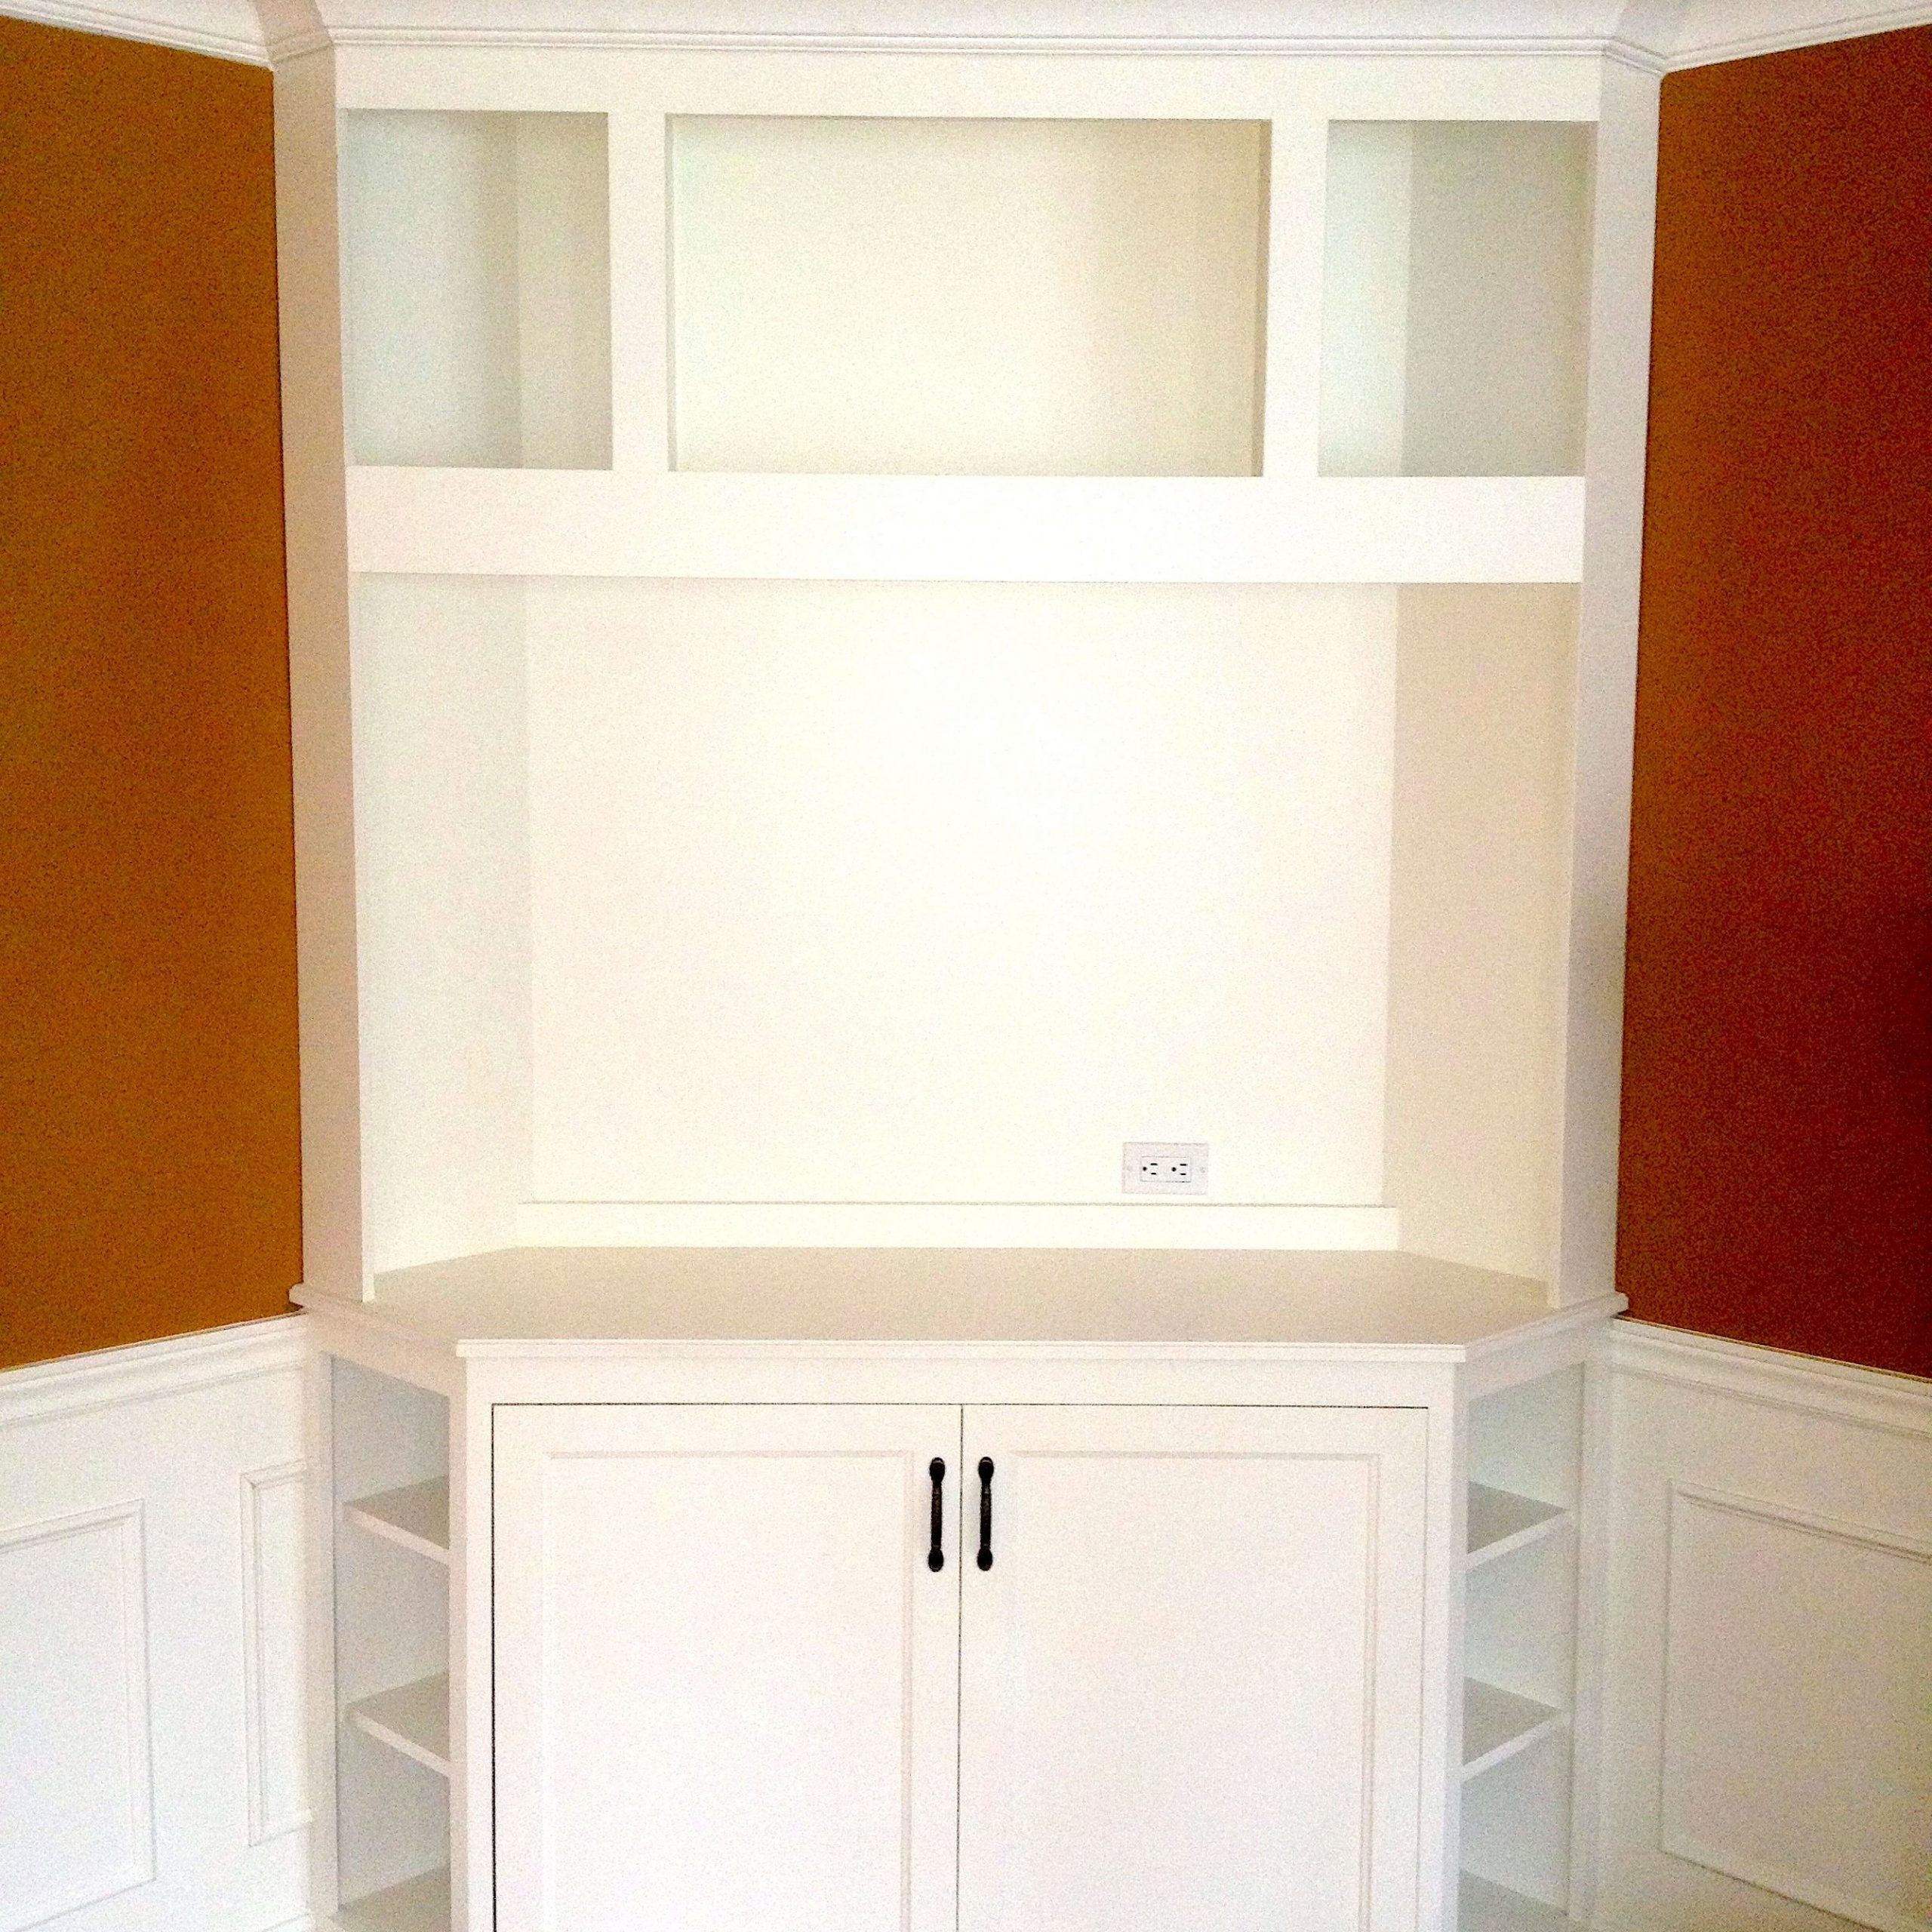 White Corner Television Unit With Upper Display Shelves Within Corner Unit Tv Stands (View 11 of 15)